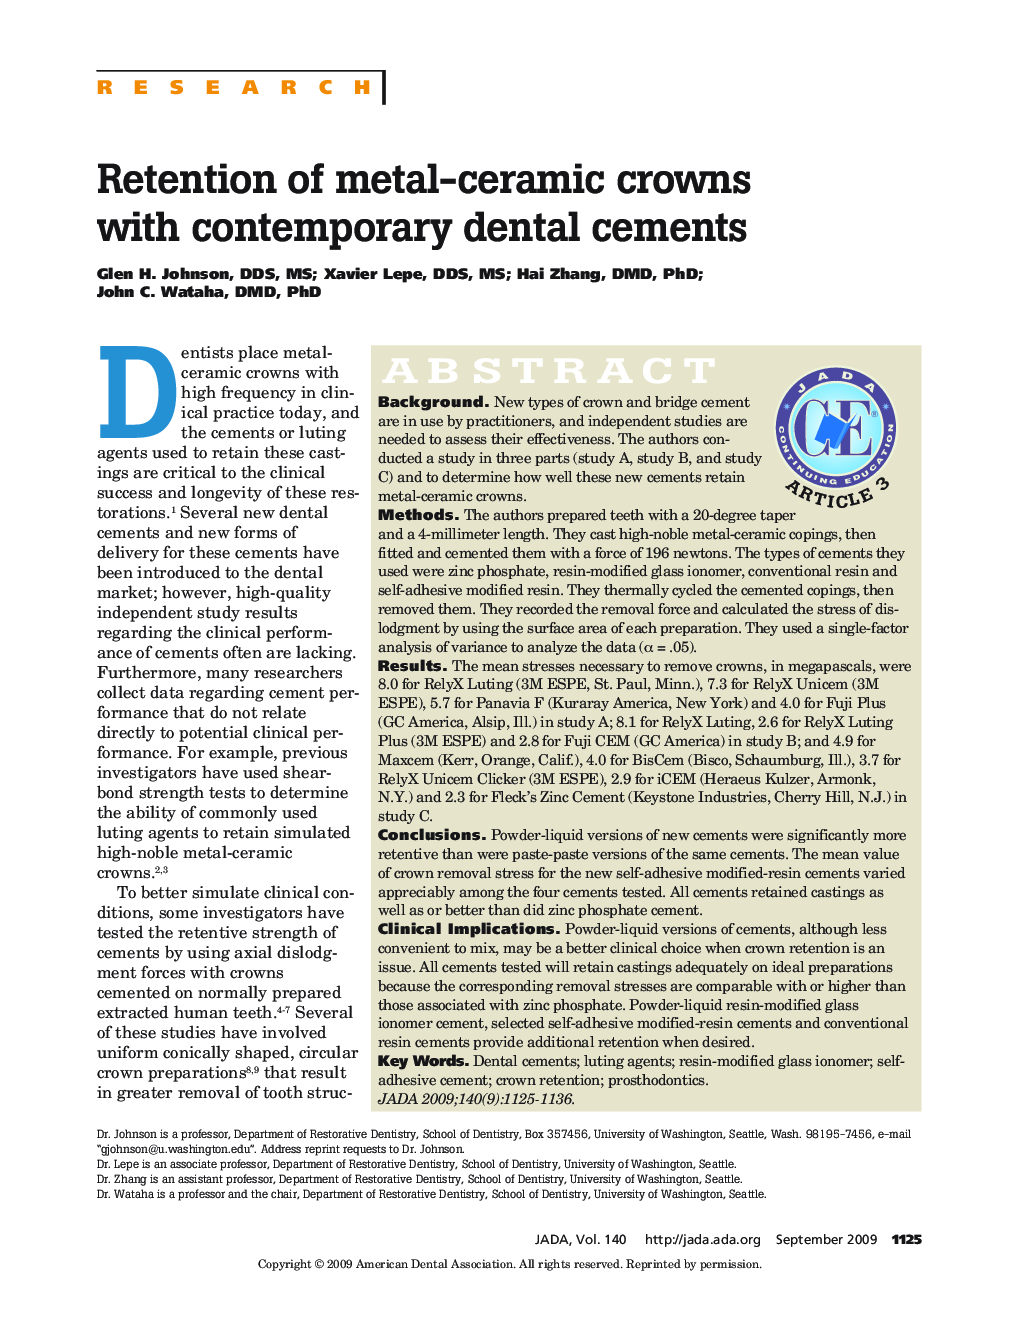 Retention of Metal-Ceramic Crowns With Contemporary Dental Cements 